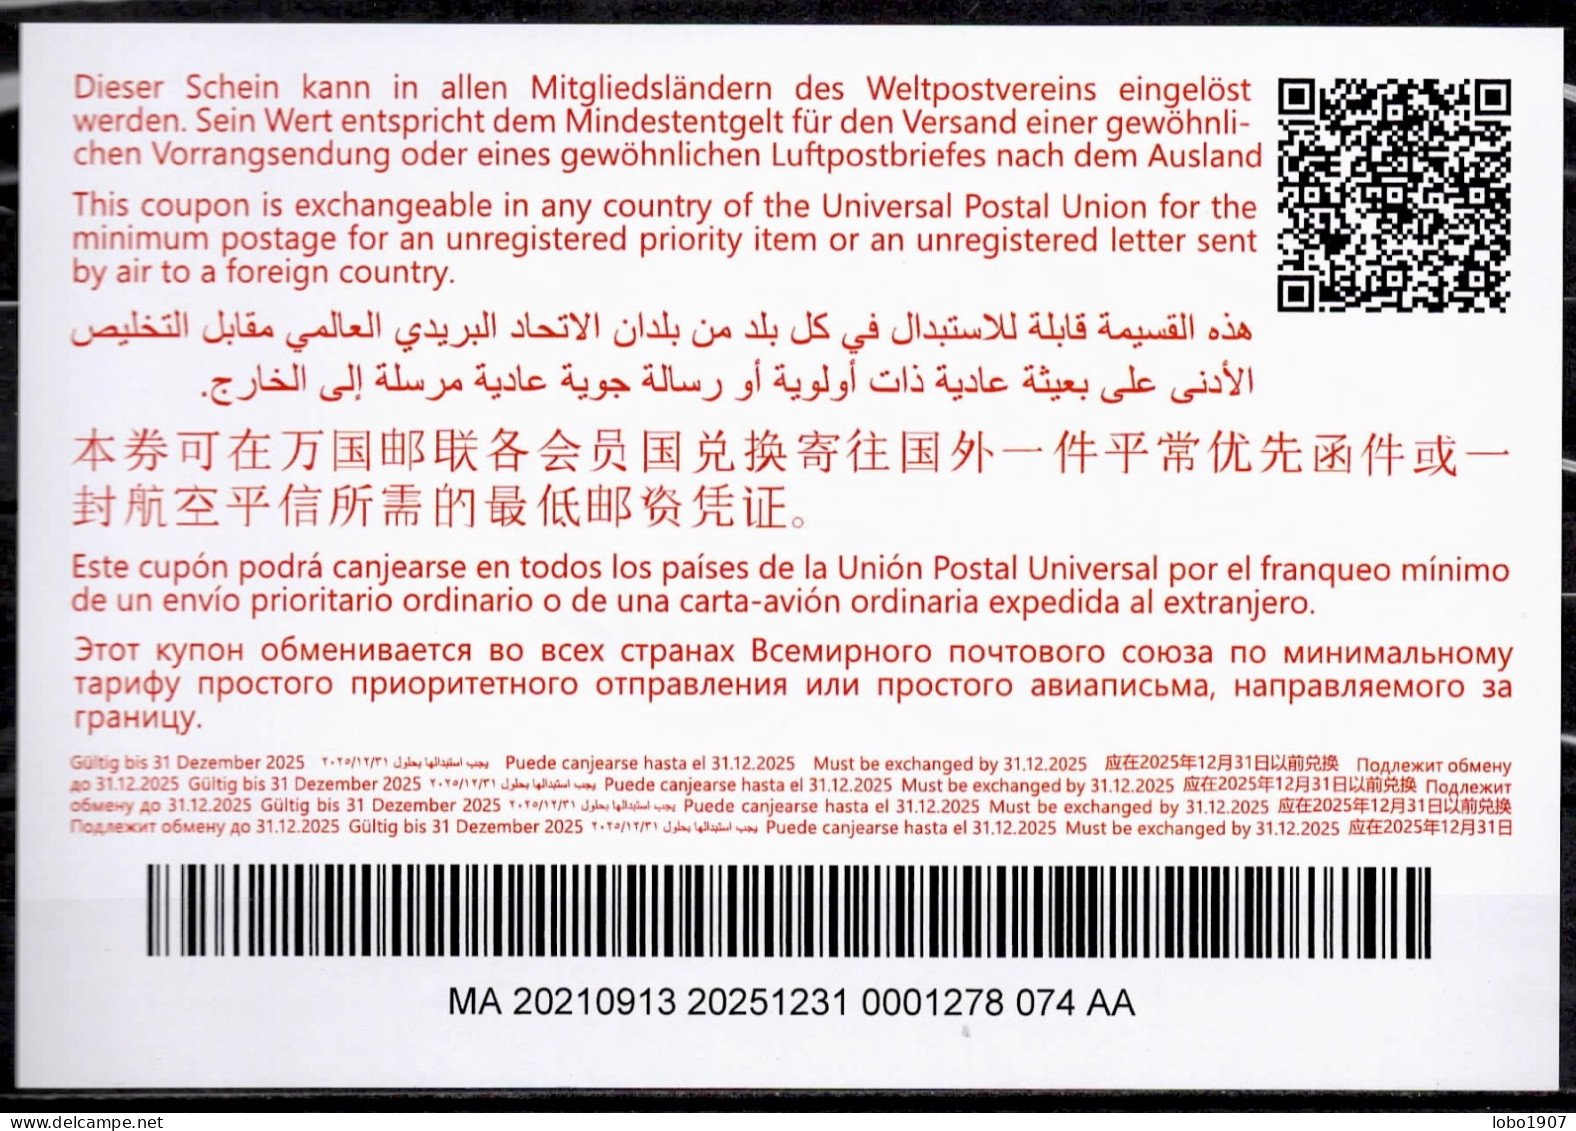 MAROC MOROCCO  Abidjan Ab46A  26,00 DH  20210913 AA  International Reply Coupon Reponse Antwortschein IRC IAS  Mint ** - Marocco (1956-...)